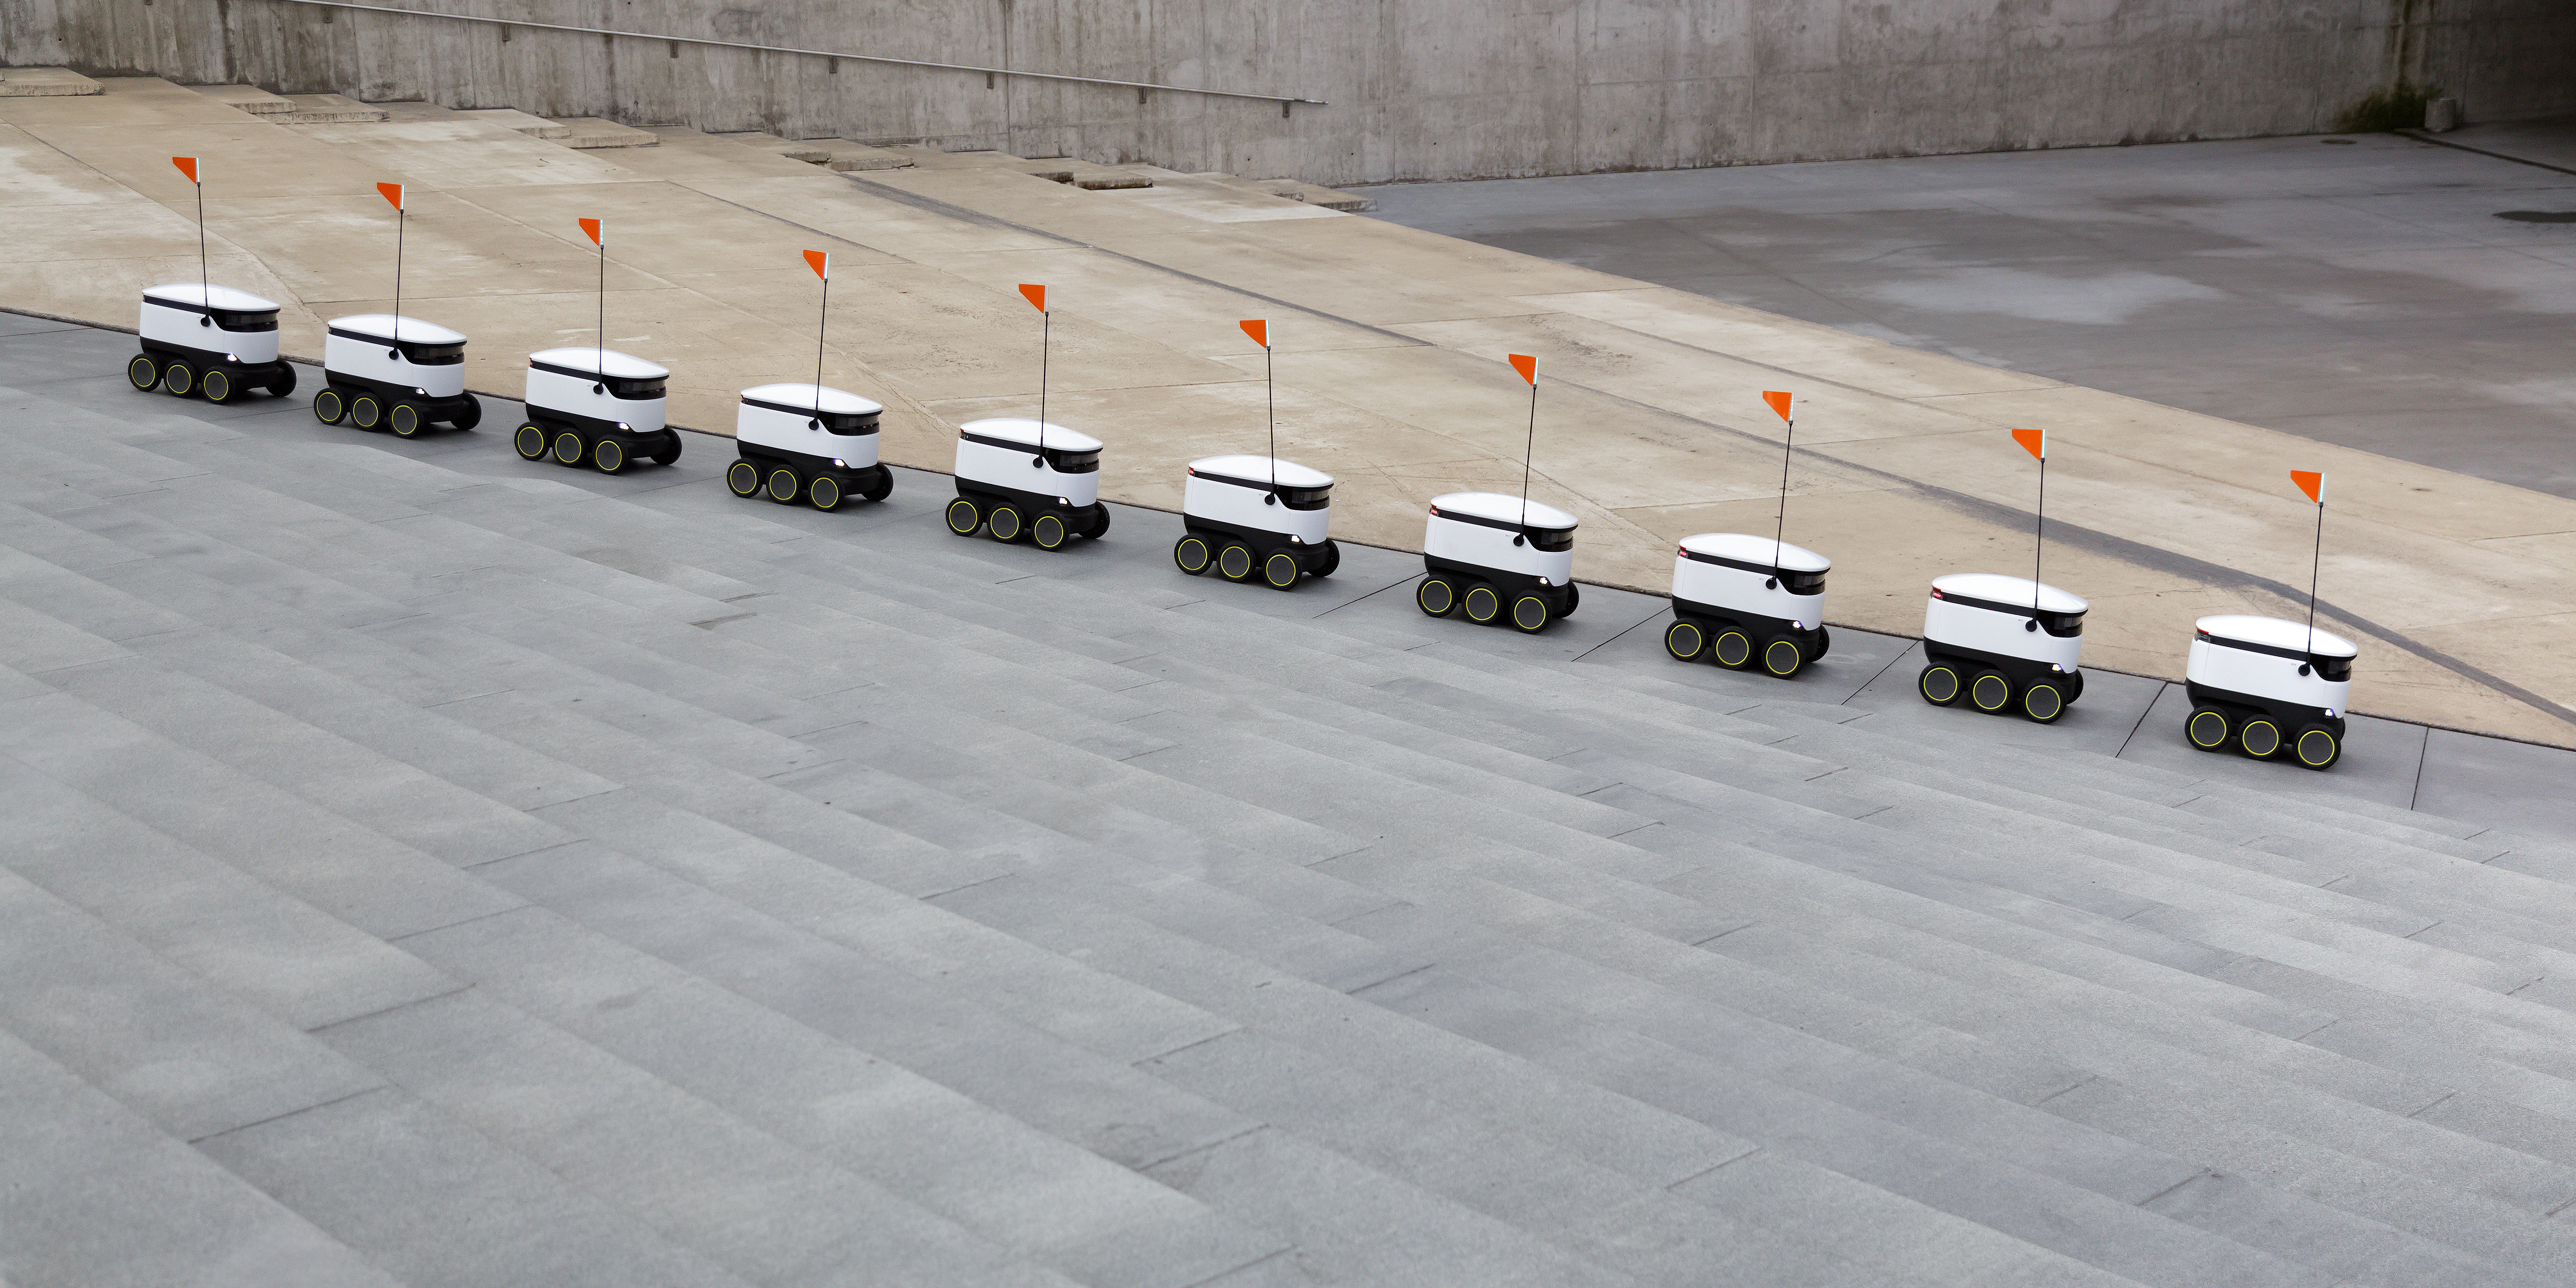 Verbal description tour of the road ahead. Image of a line of small white starship robots wheeling over tiled gray ground.